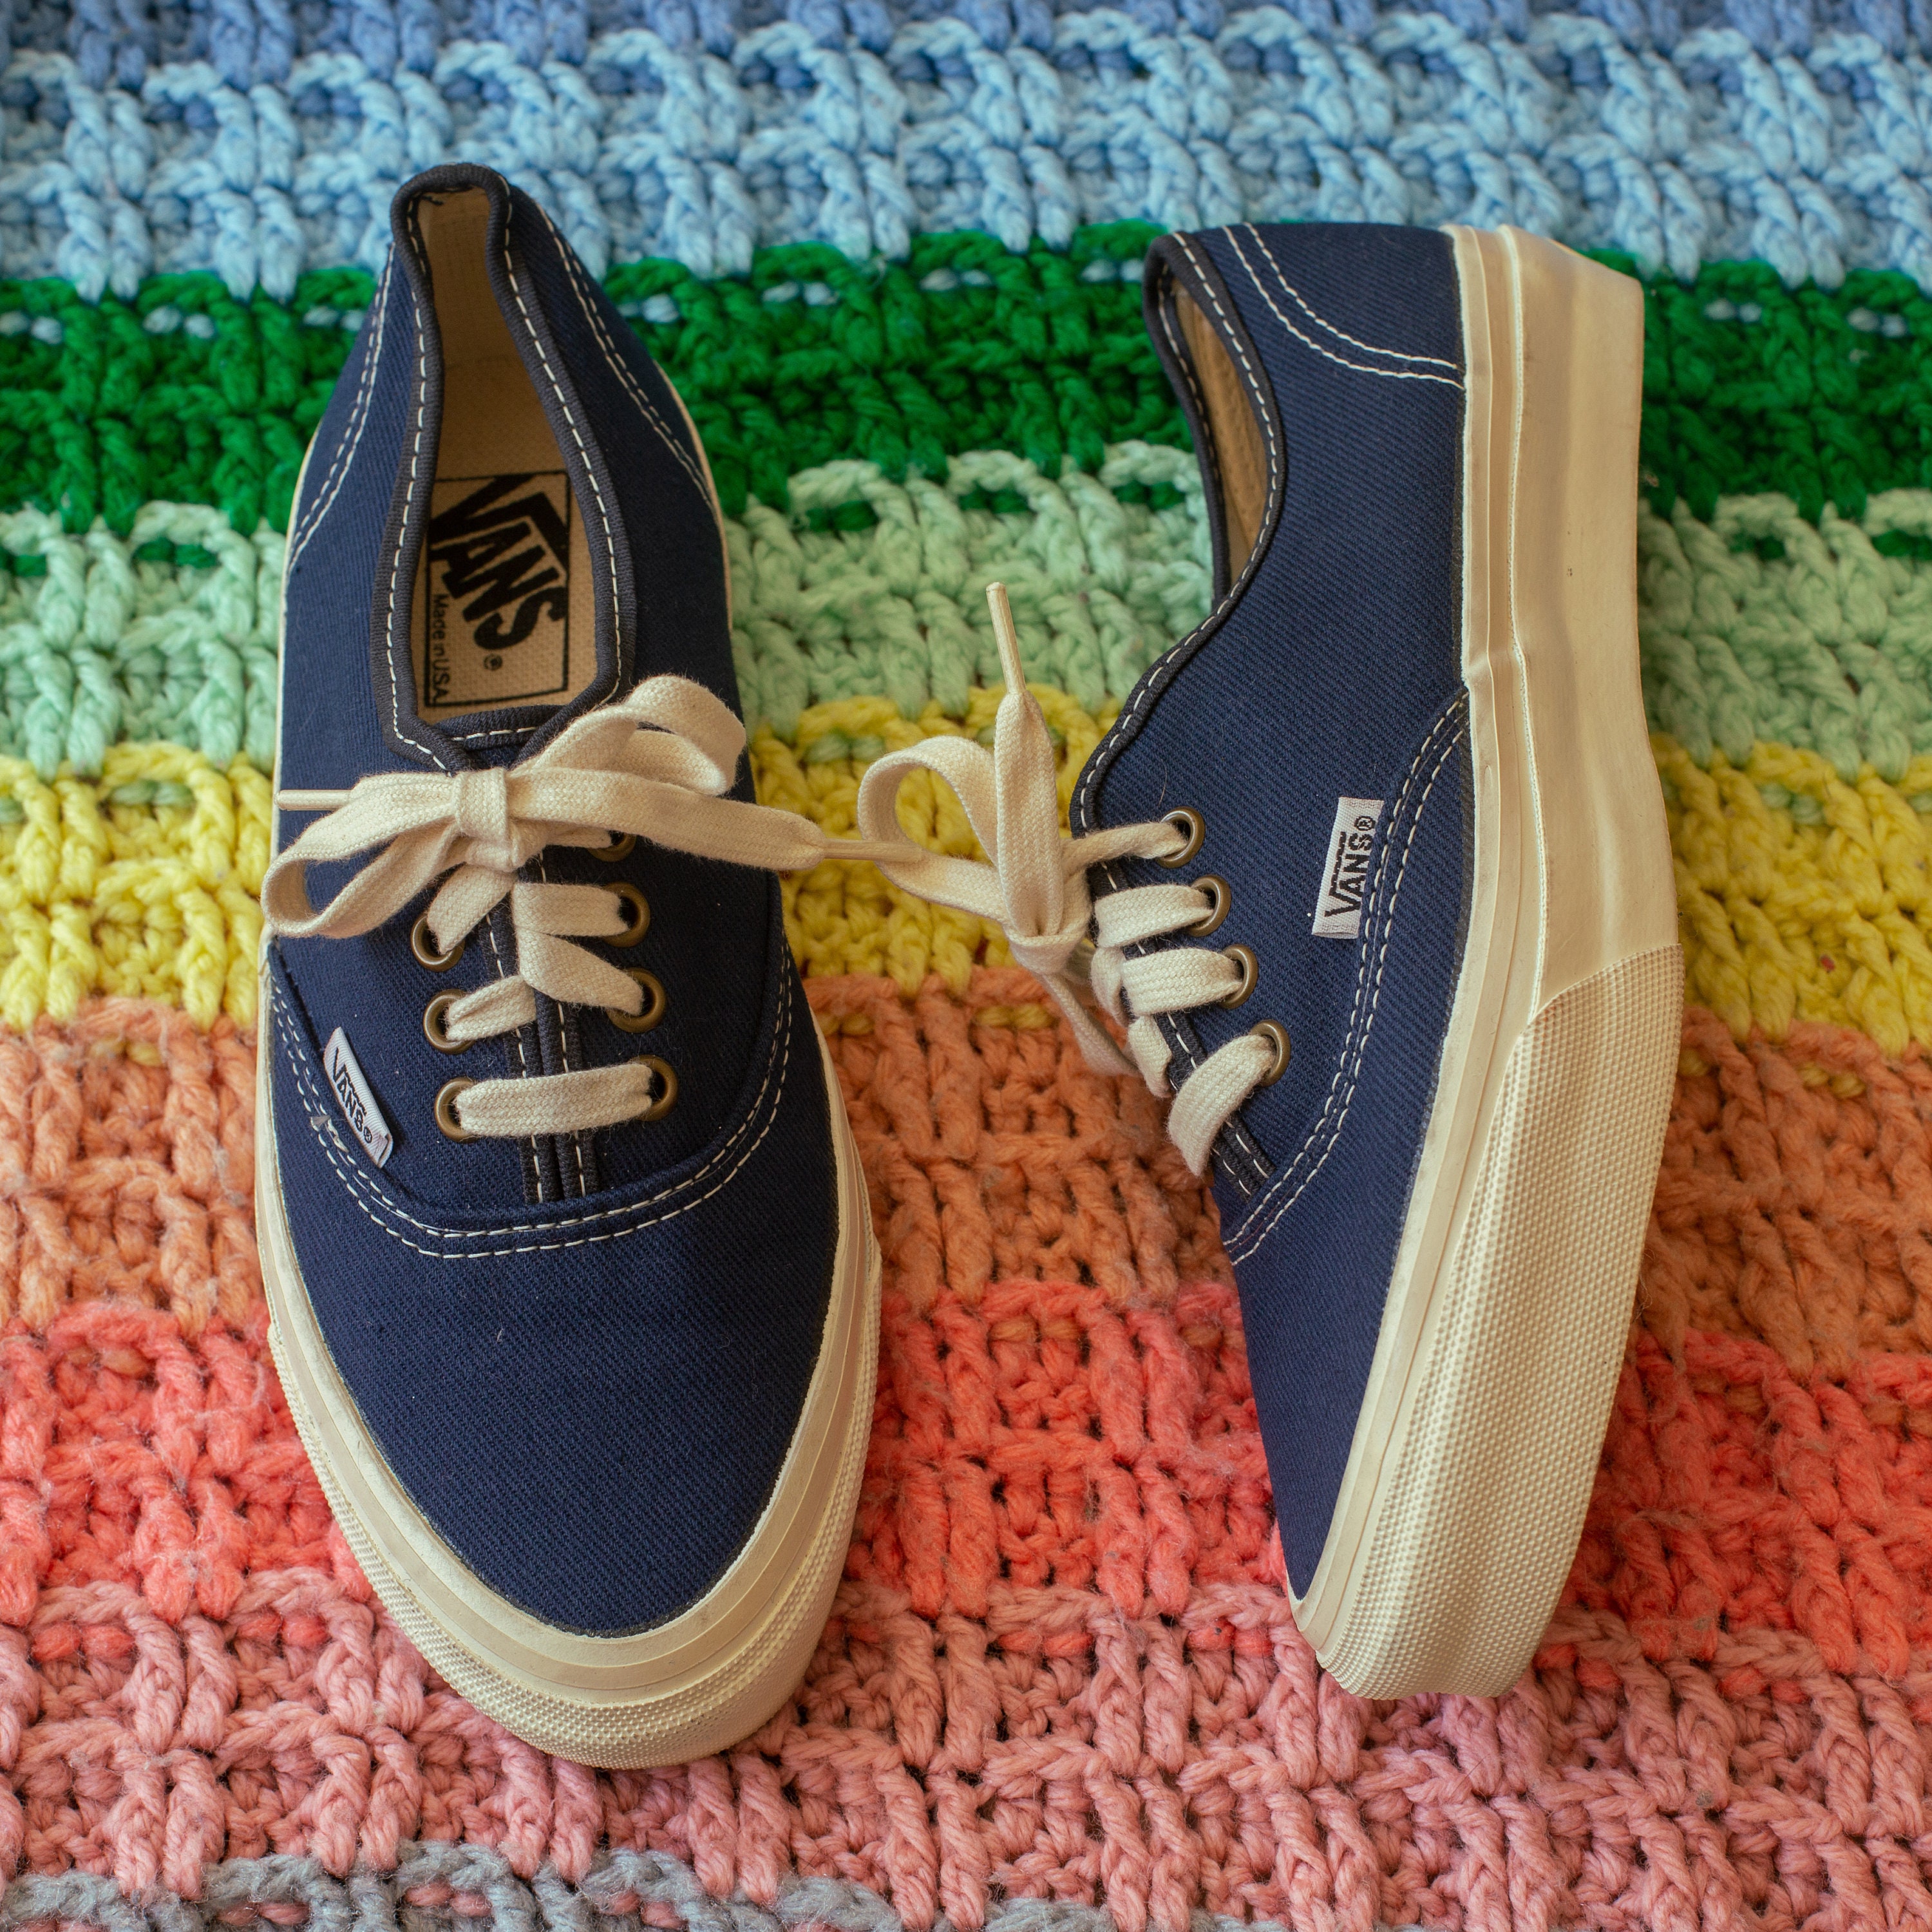 Buy Vintage 1980s Blue Vans Made in the Usa New Old Stock in India - Etsy